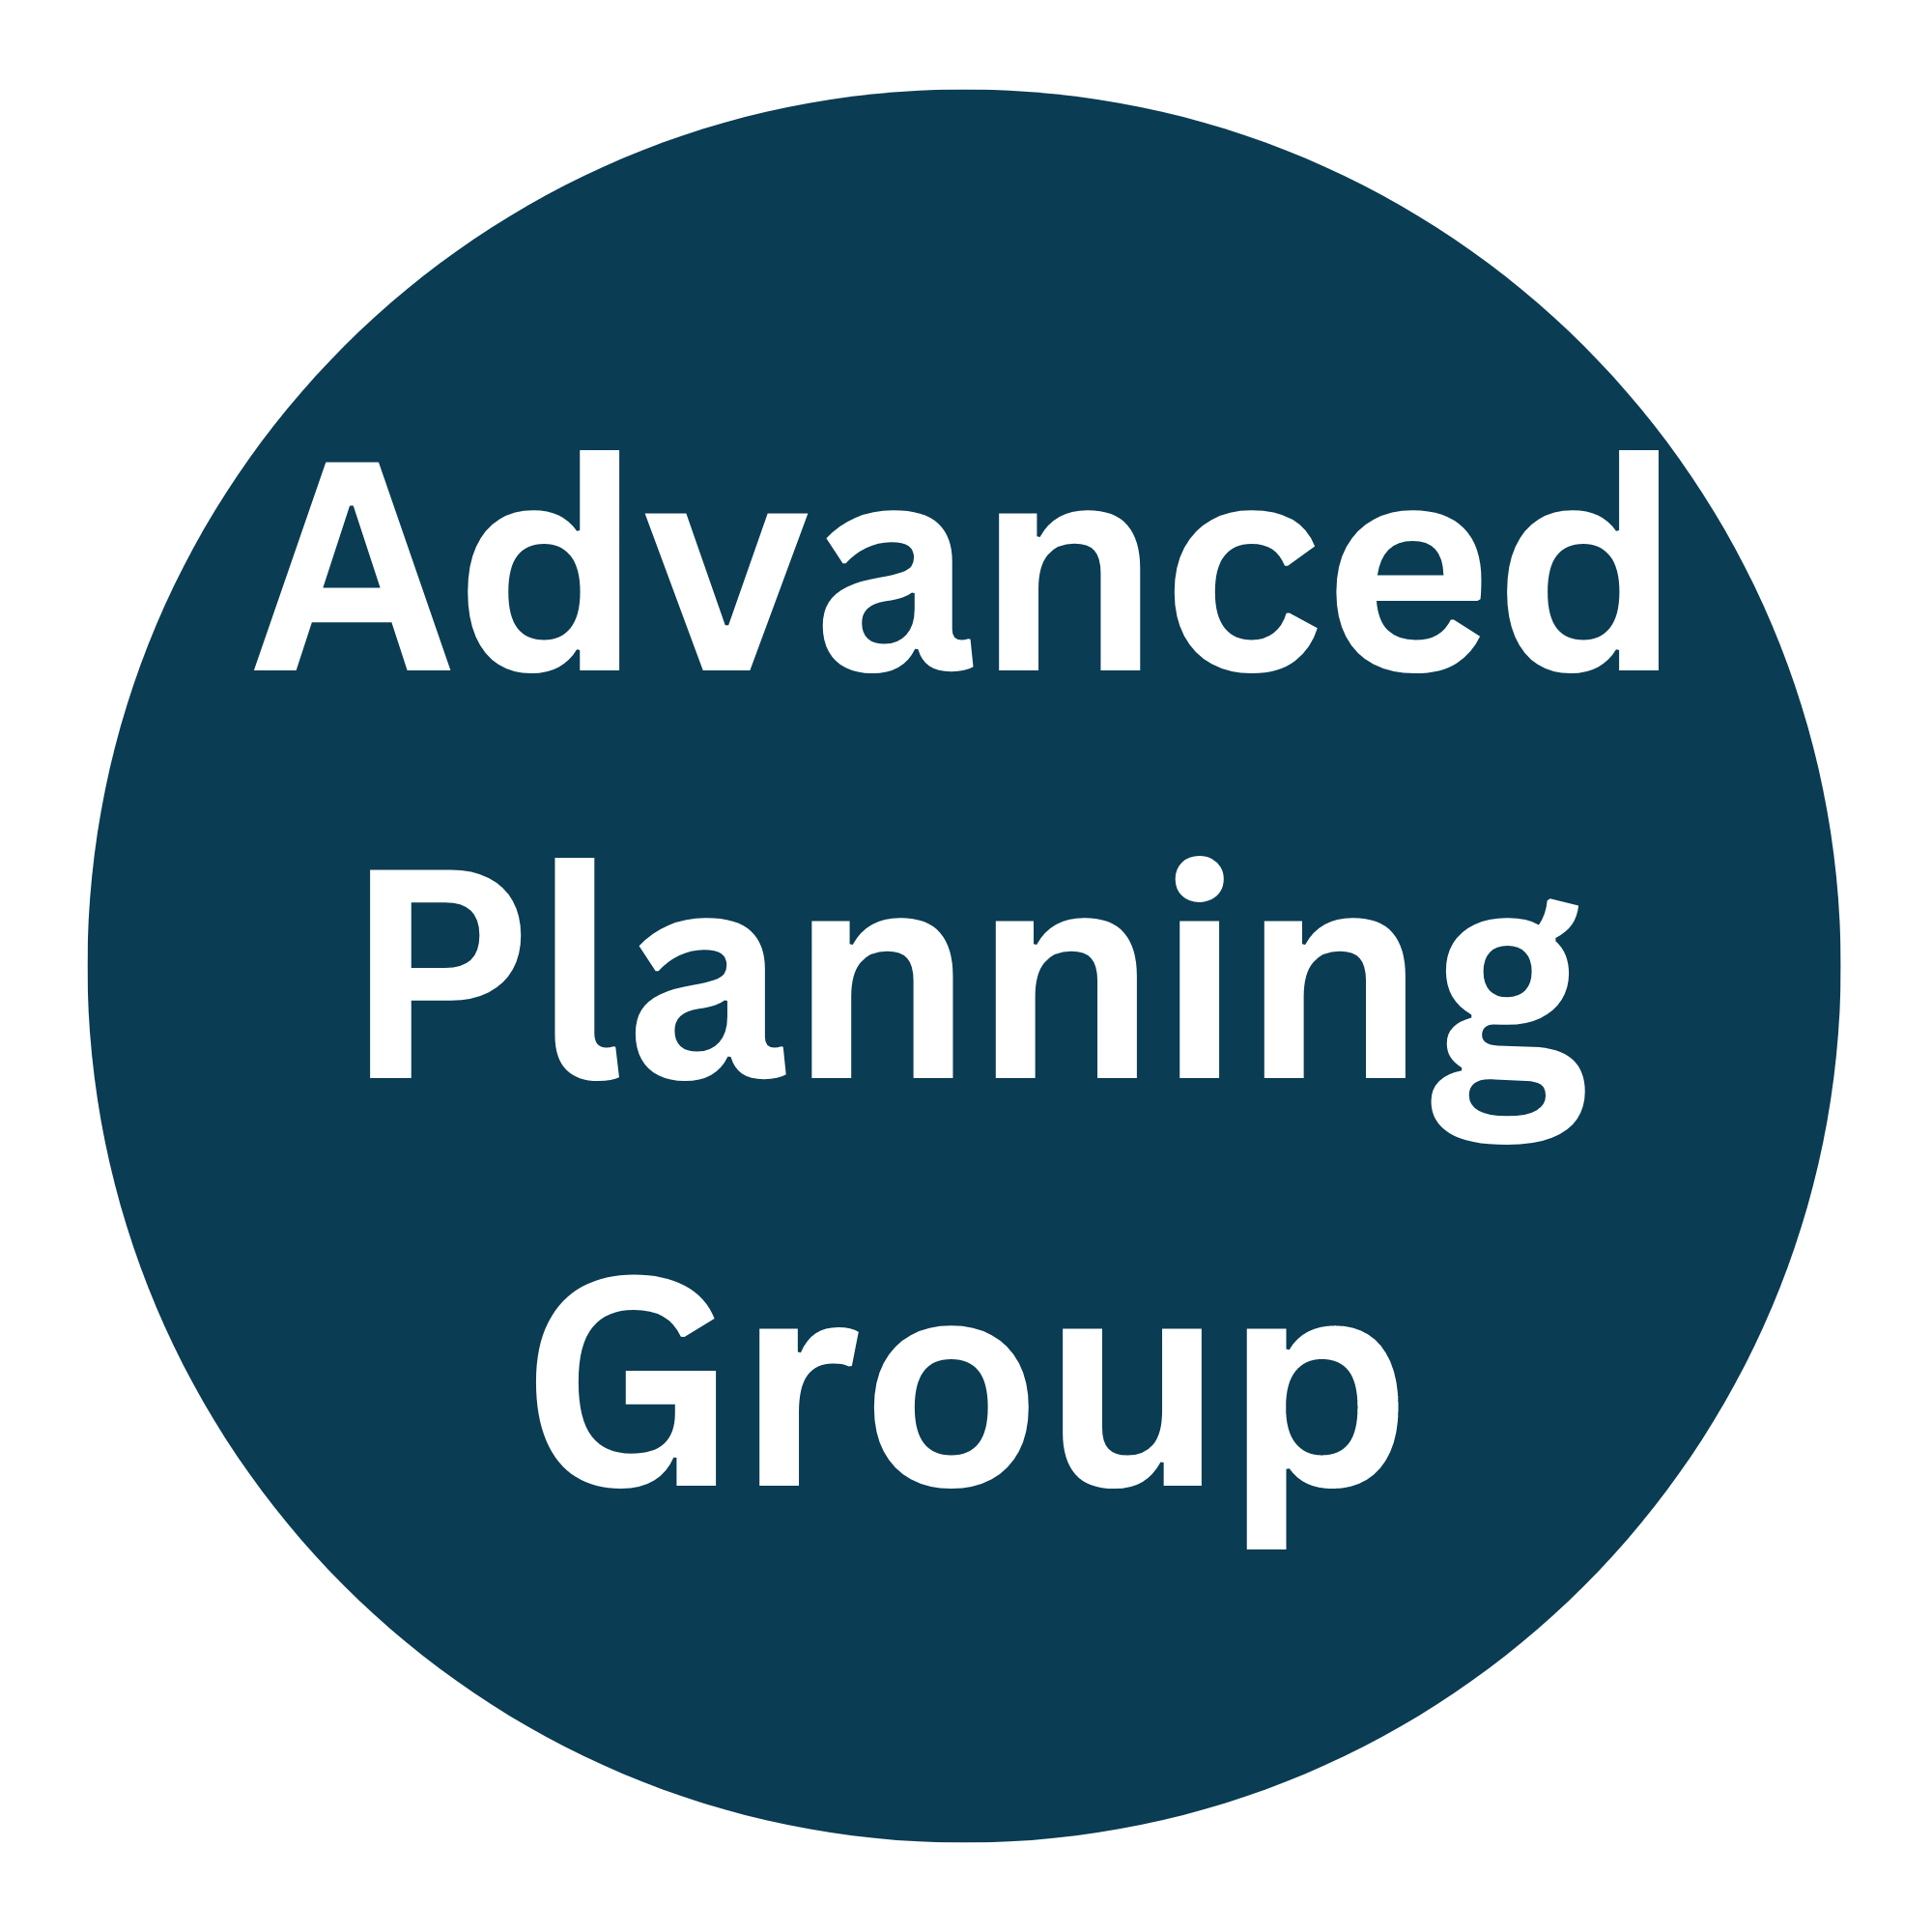 Advanced Planning Group